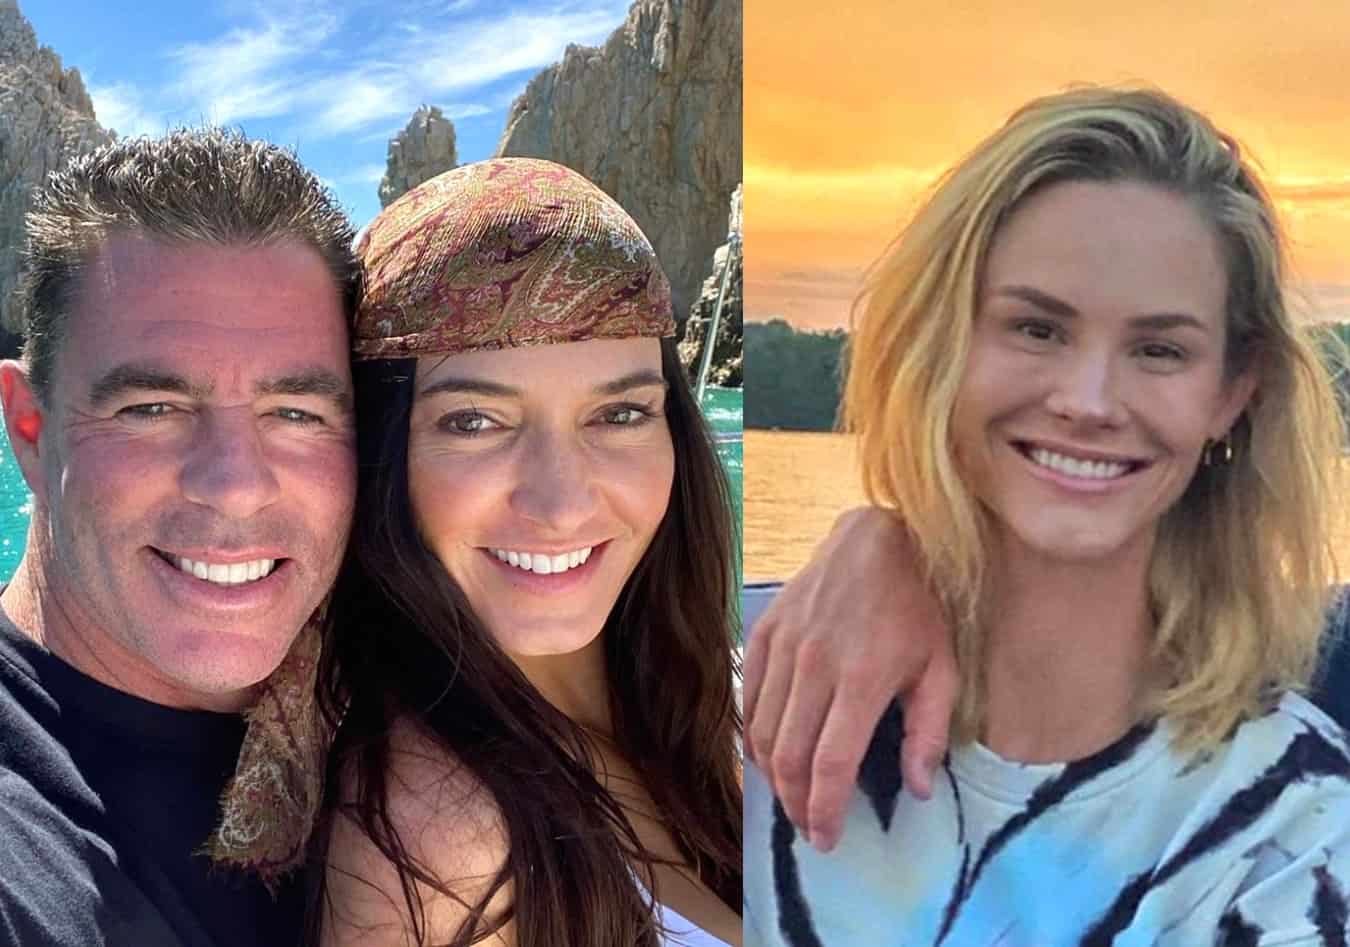 Jim Edmonds Slams Meghan as a Liar, Says She "[Ruined]" Nanny's Life as Kortnie Suspects Mental Illness and Suggests RHOC Alum "Doesn't Care" How Behavior Impacts Kids